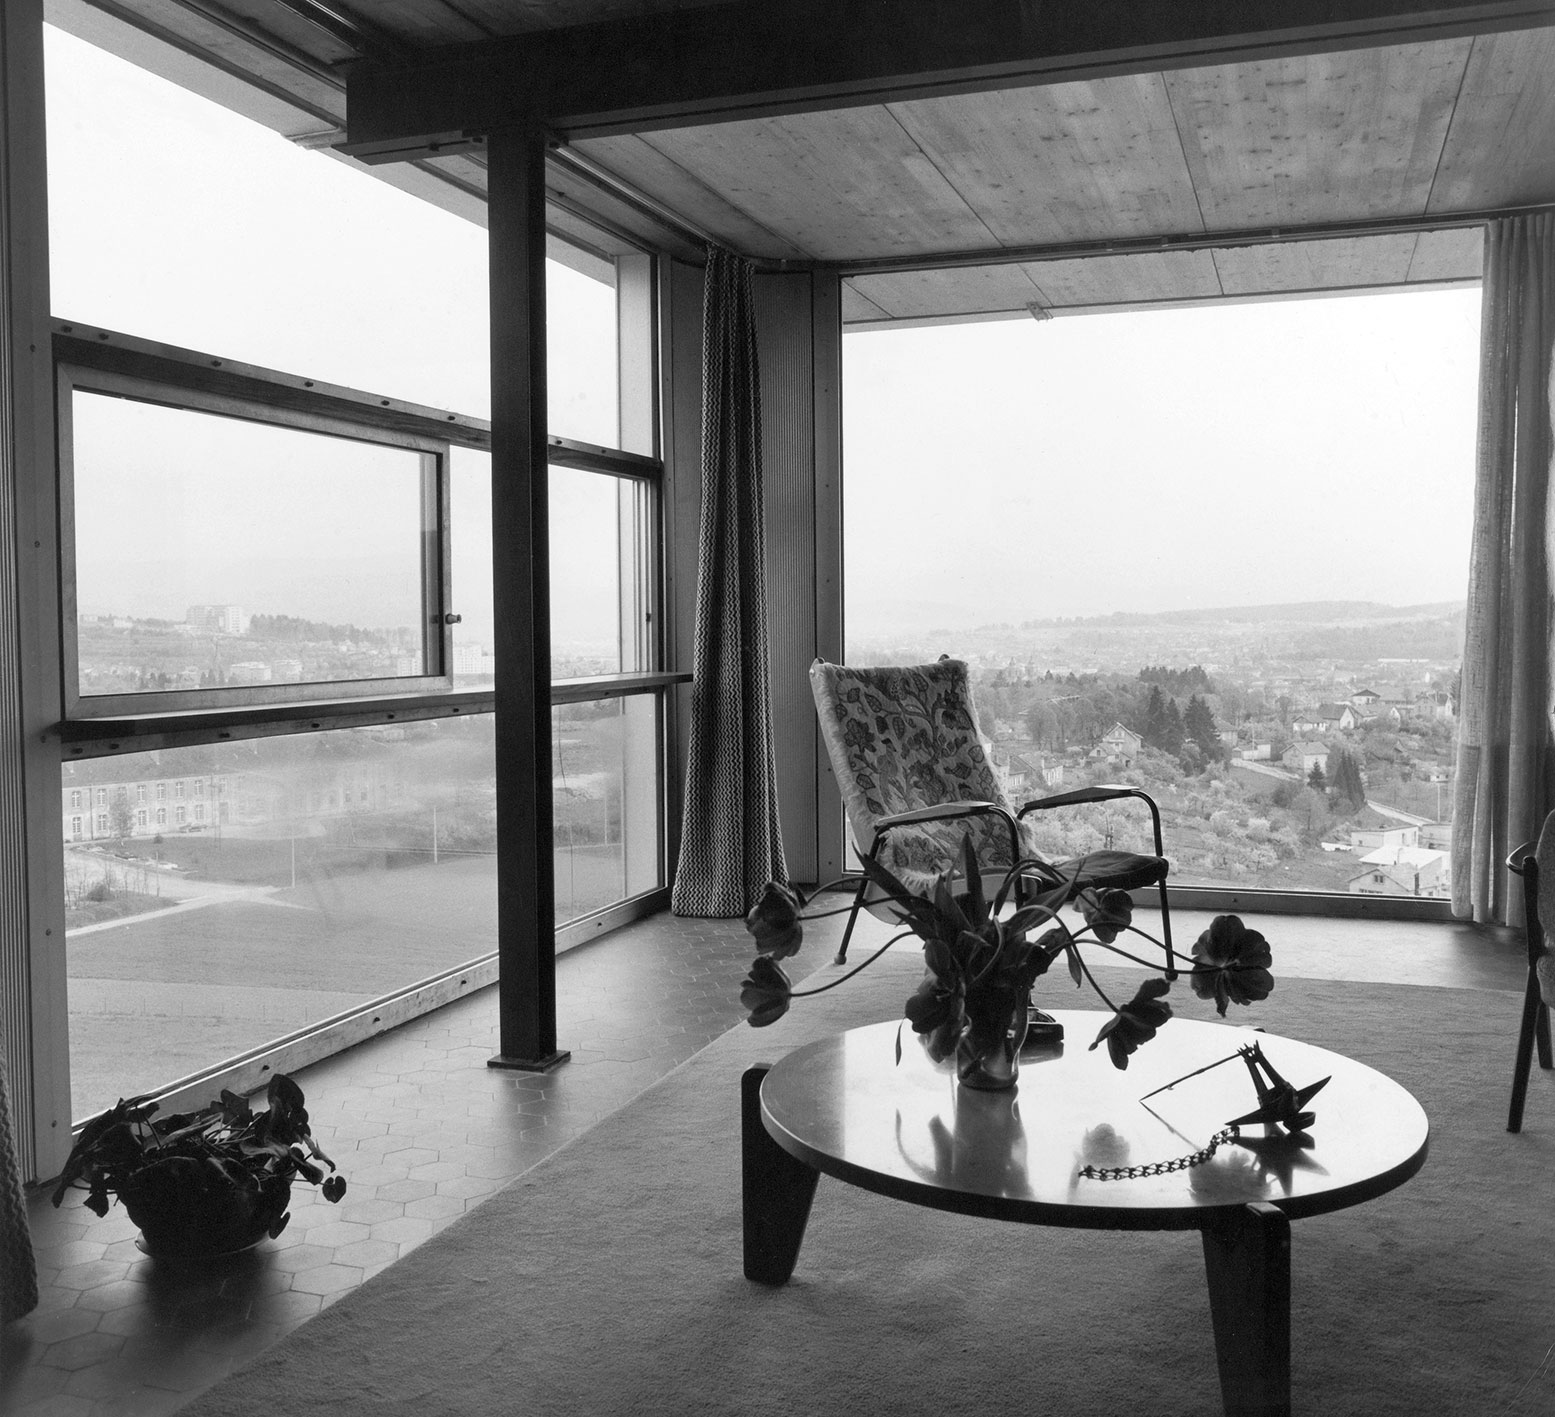 House in Saint-Dié (J. Prouvé, with architects E. Remondino and H. Baumann, 1961). Living room corner furnished with a Visiteur armchair and a guéridon no. 402.